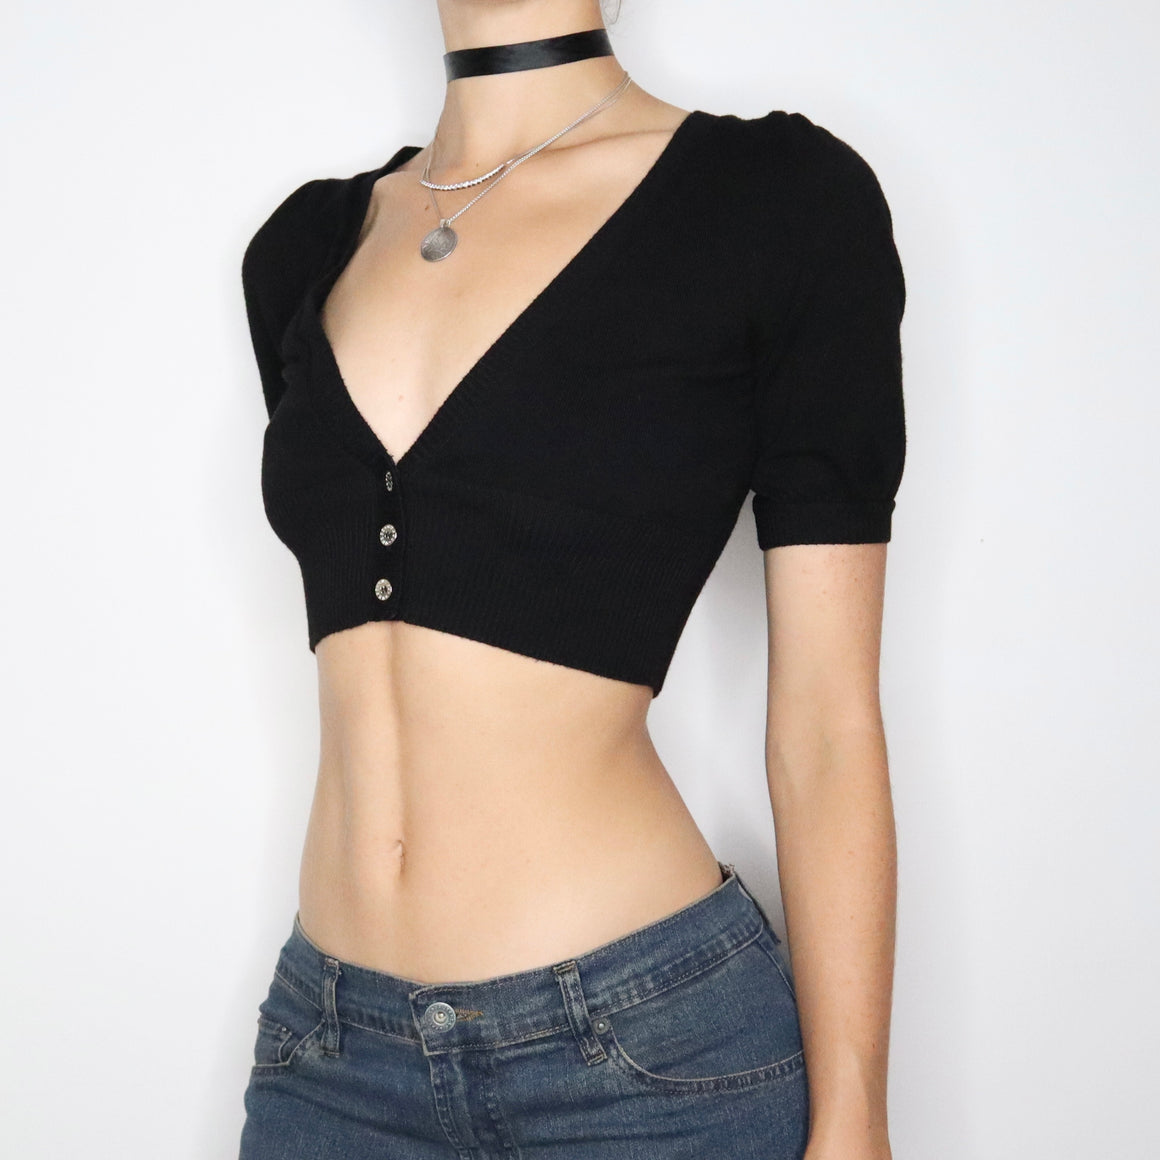 Guess Black Cropped Cardigan (Small)